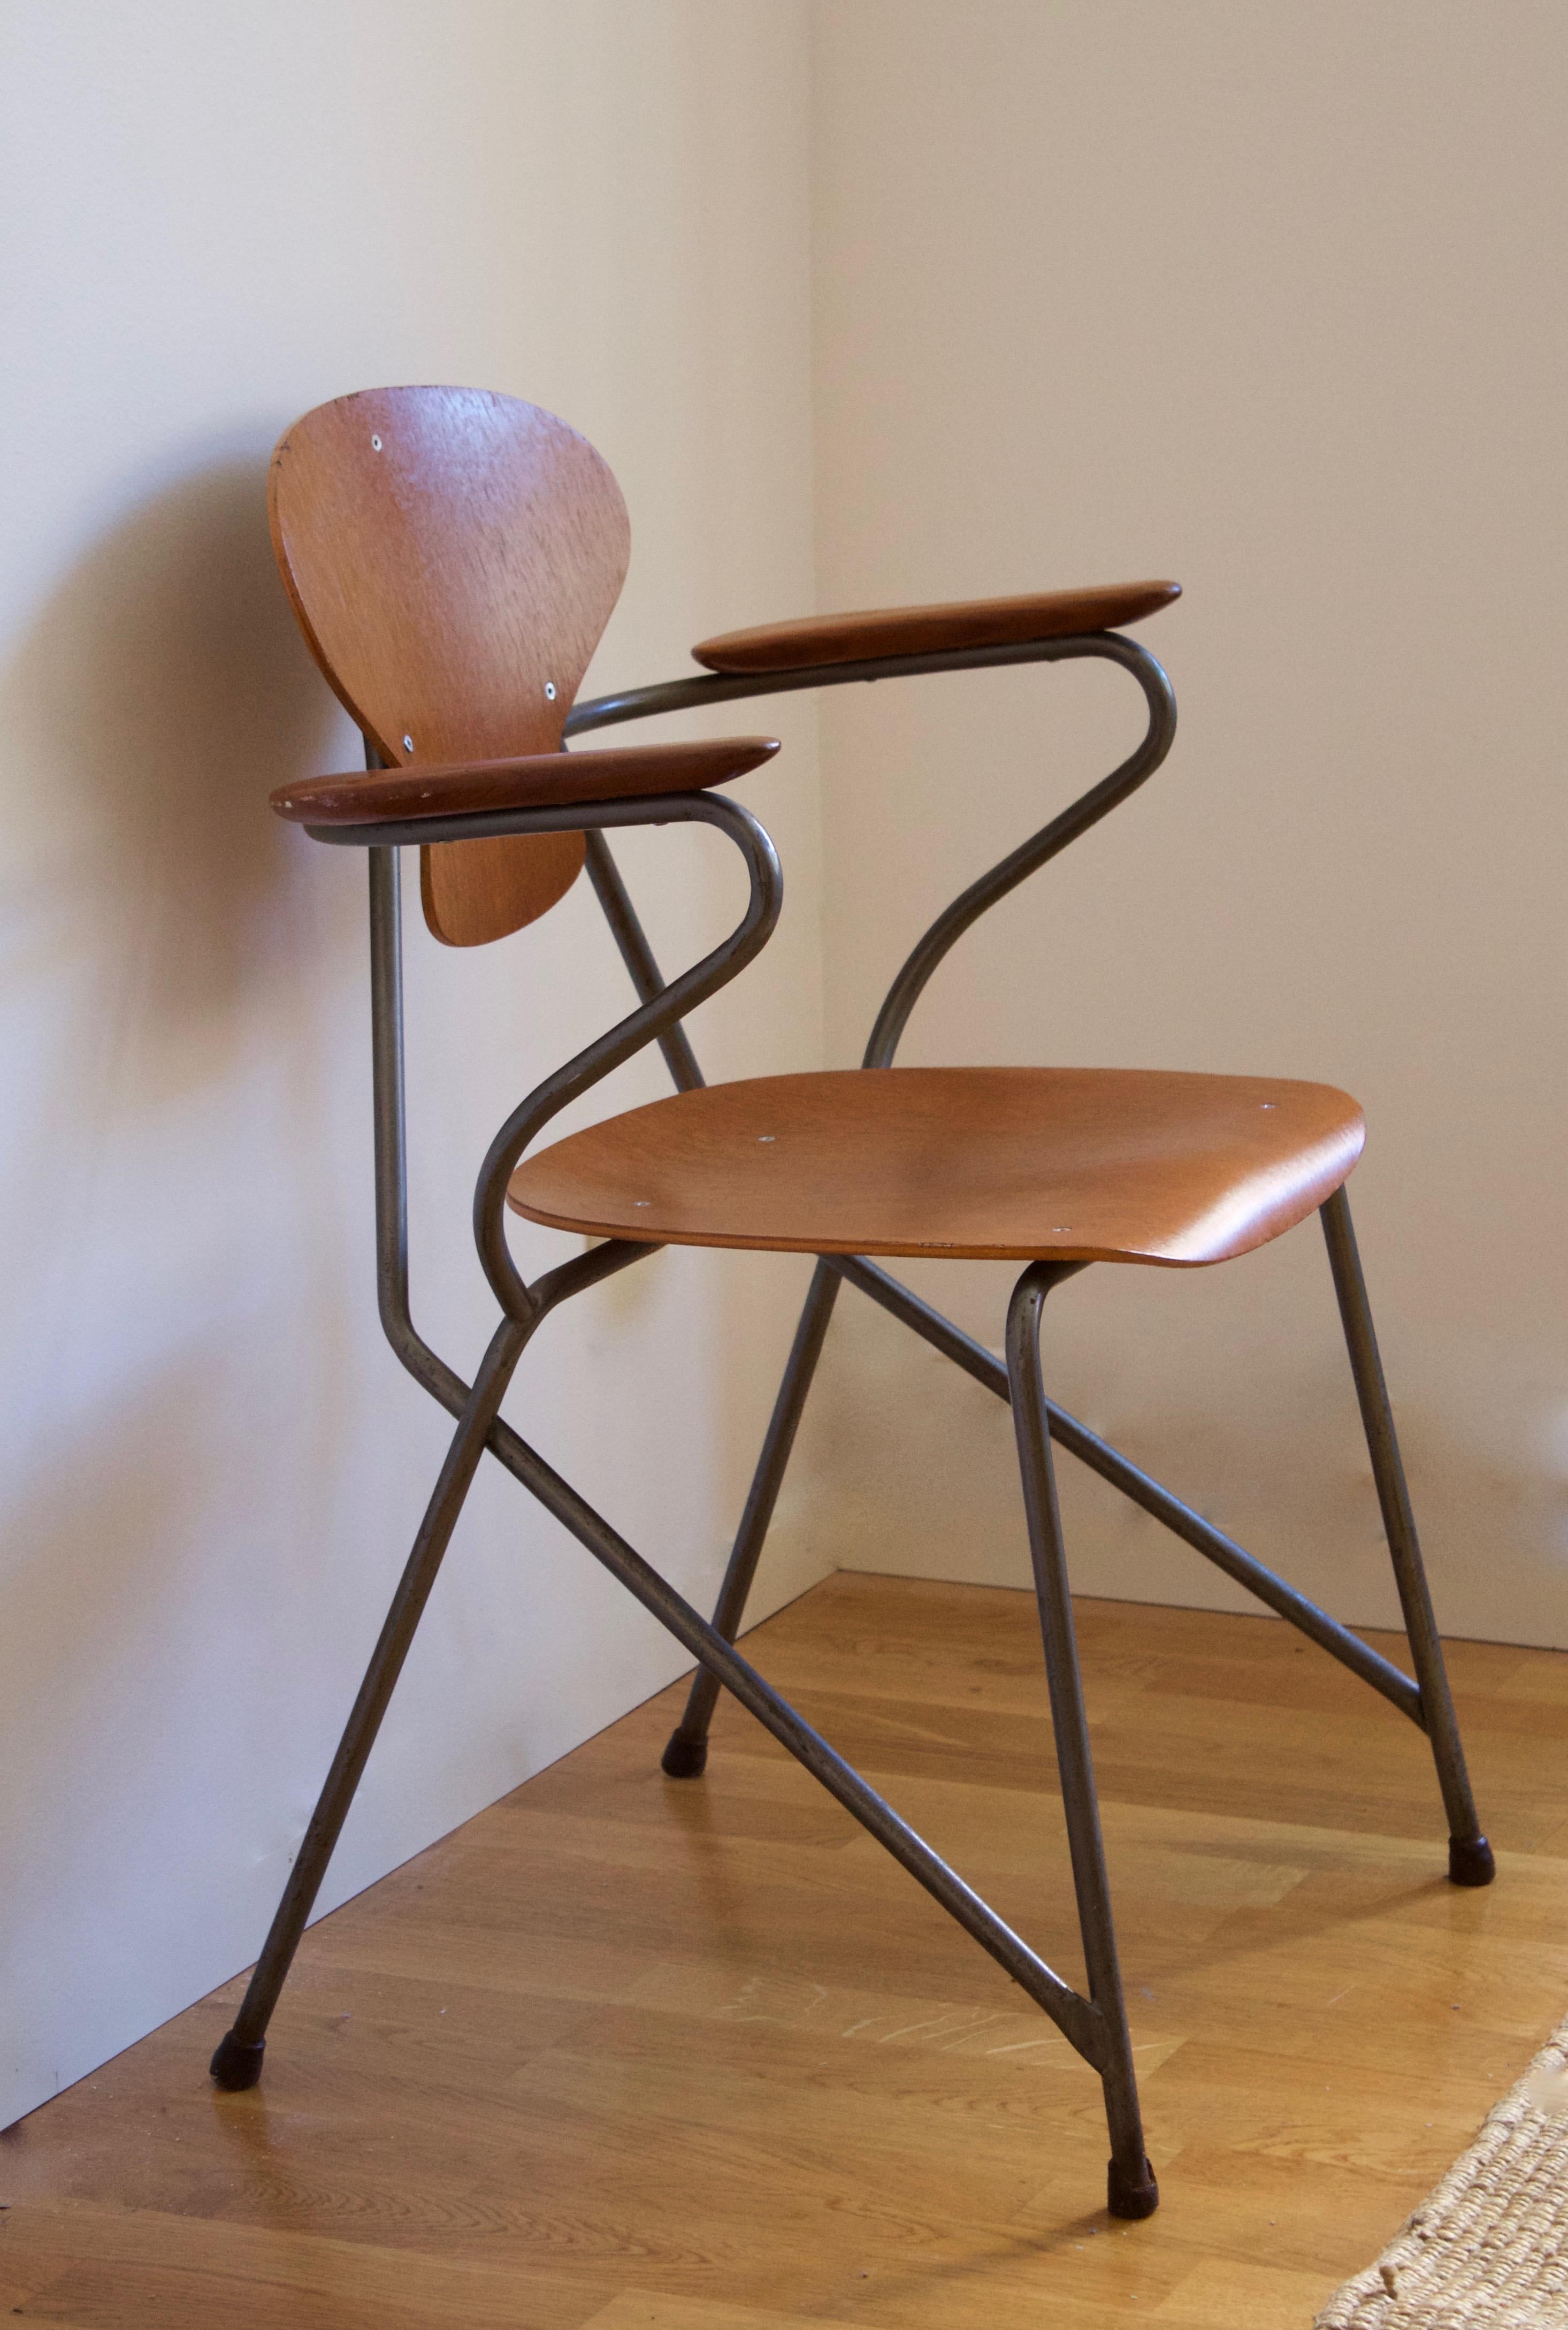 A rare armchair designed by important Danish architect Steen Eiler Rasmussen in partnership with product designer Kai Lyngfeldt Larsen. Designed for Rasmussens Rungsted Skole in 1954. Produced by Danbork.

Example from the original interior.